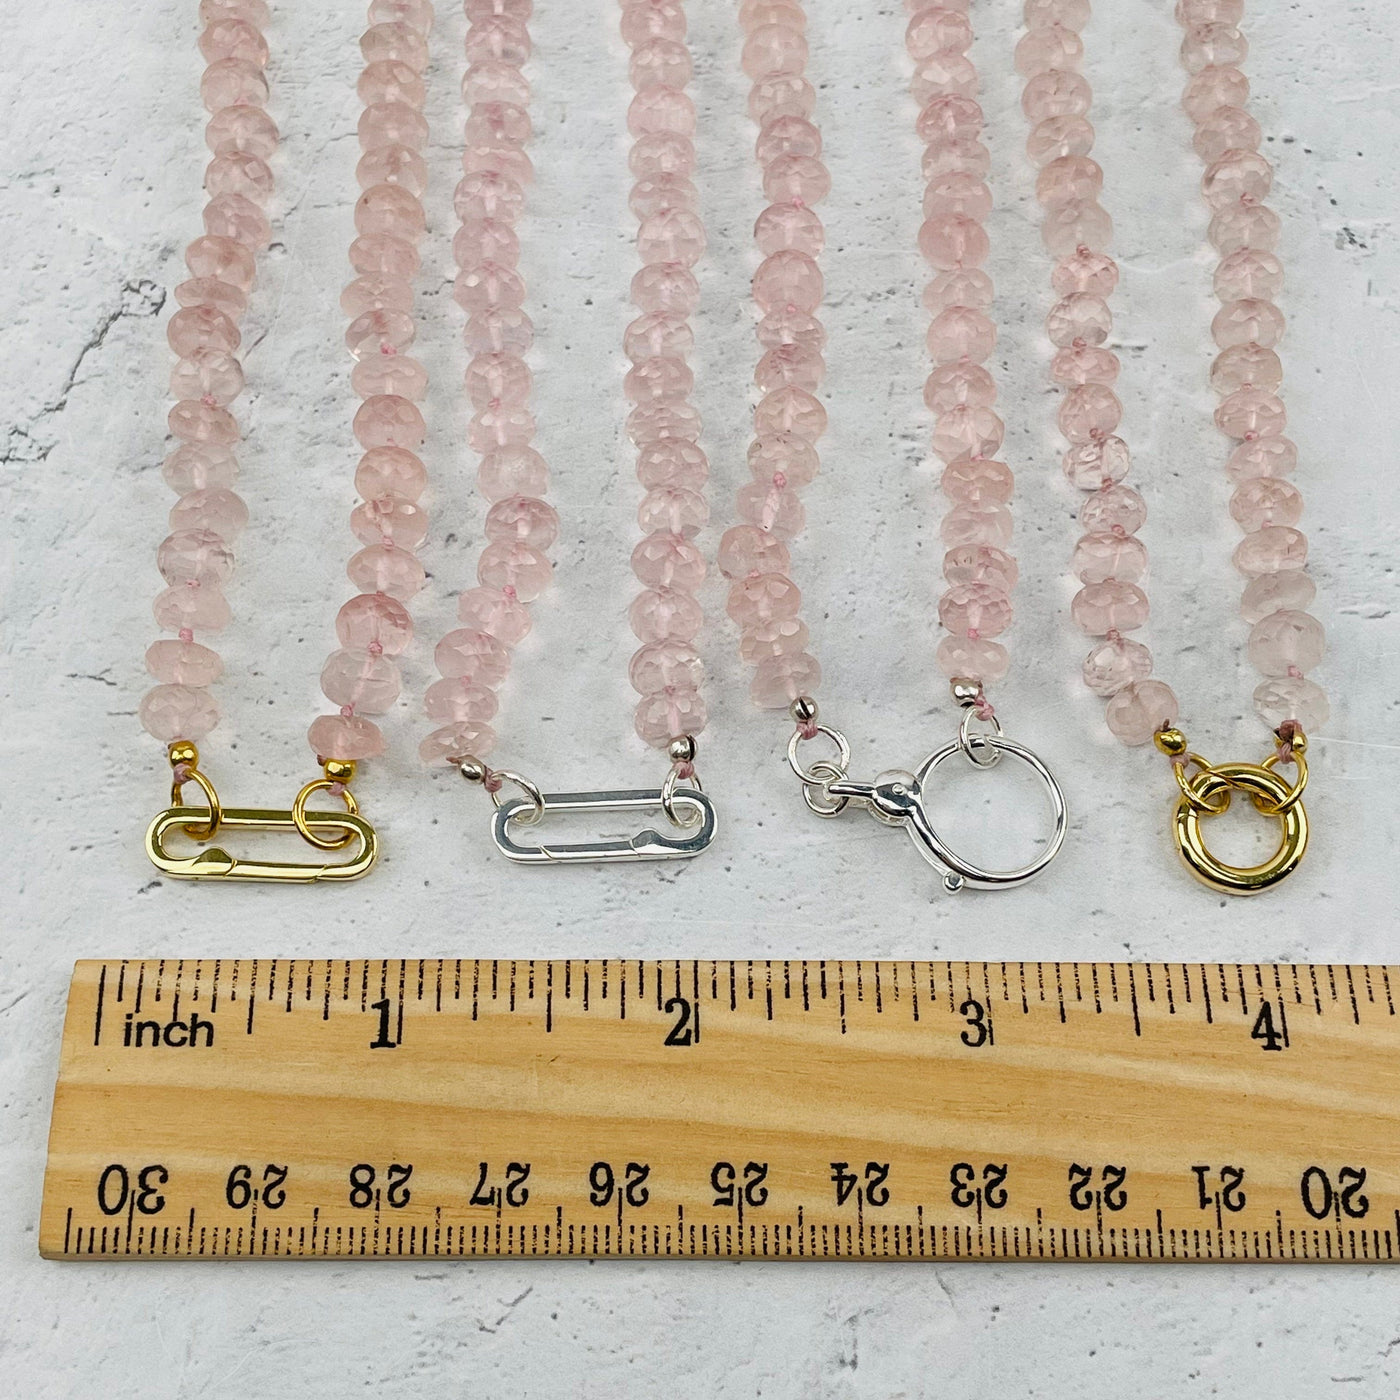 clasps next to a ruler for size reference 